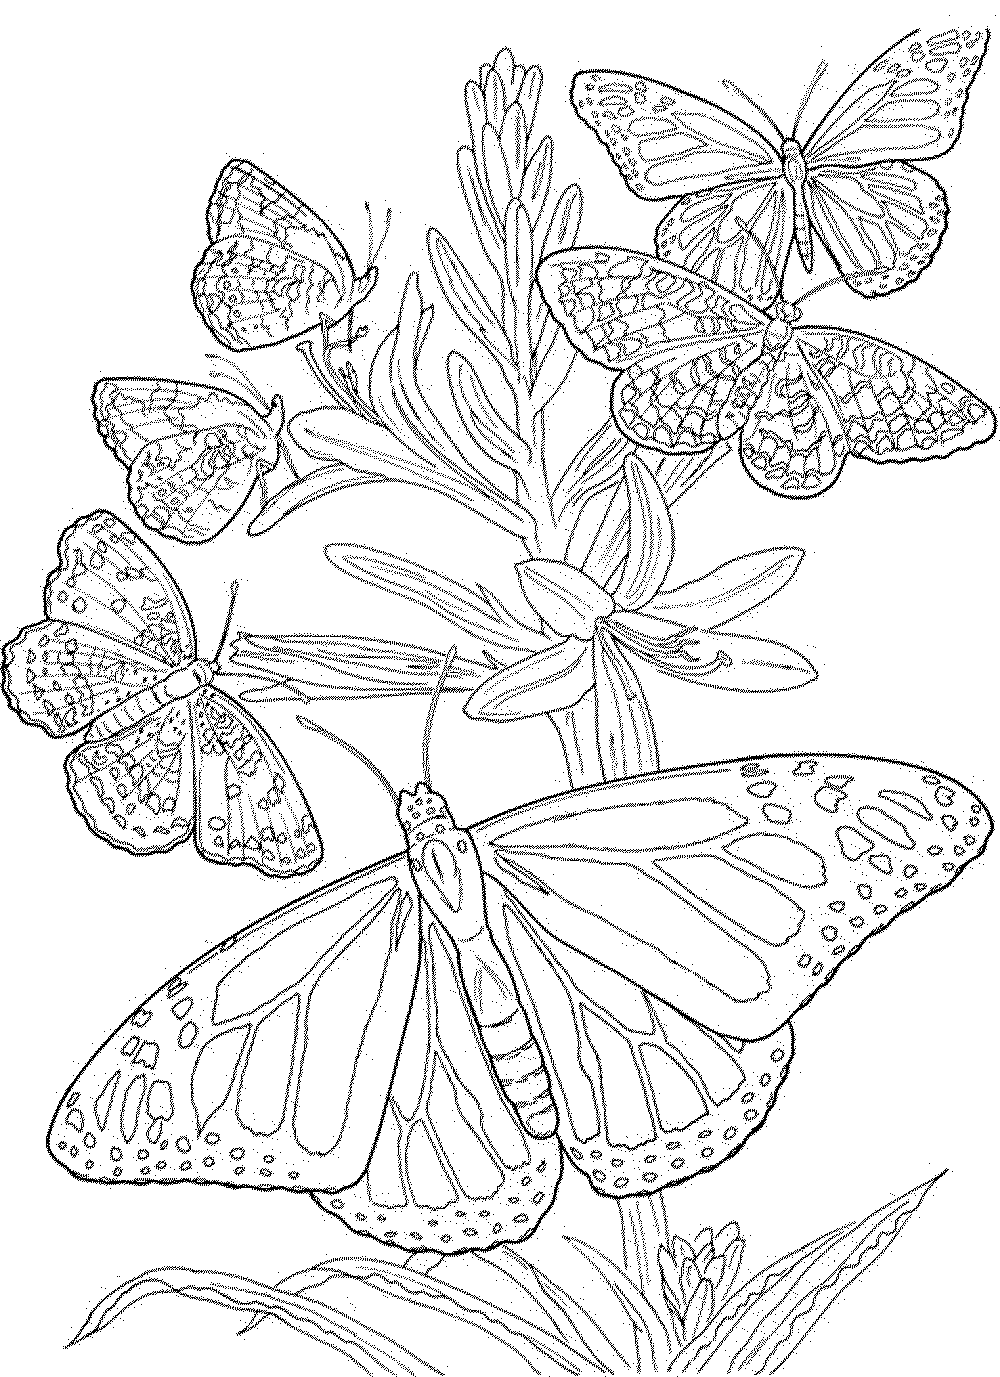 butterfly-coloring-pages-for-adults-free-printable | | BestAppsForKids.com